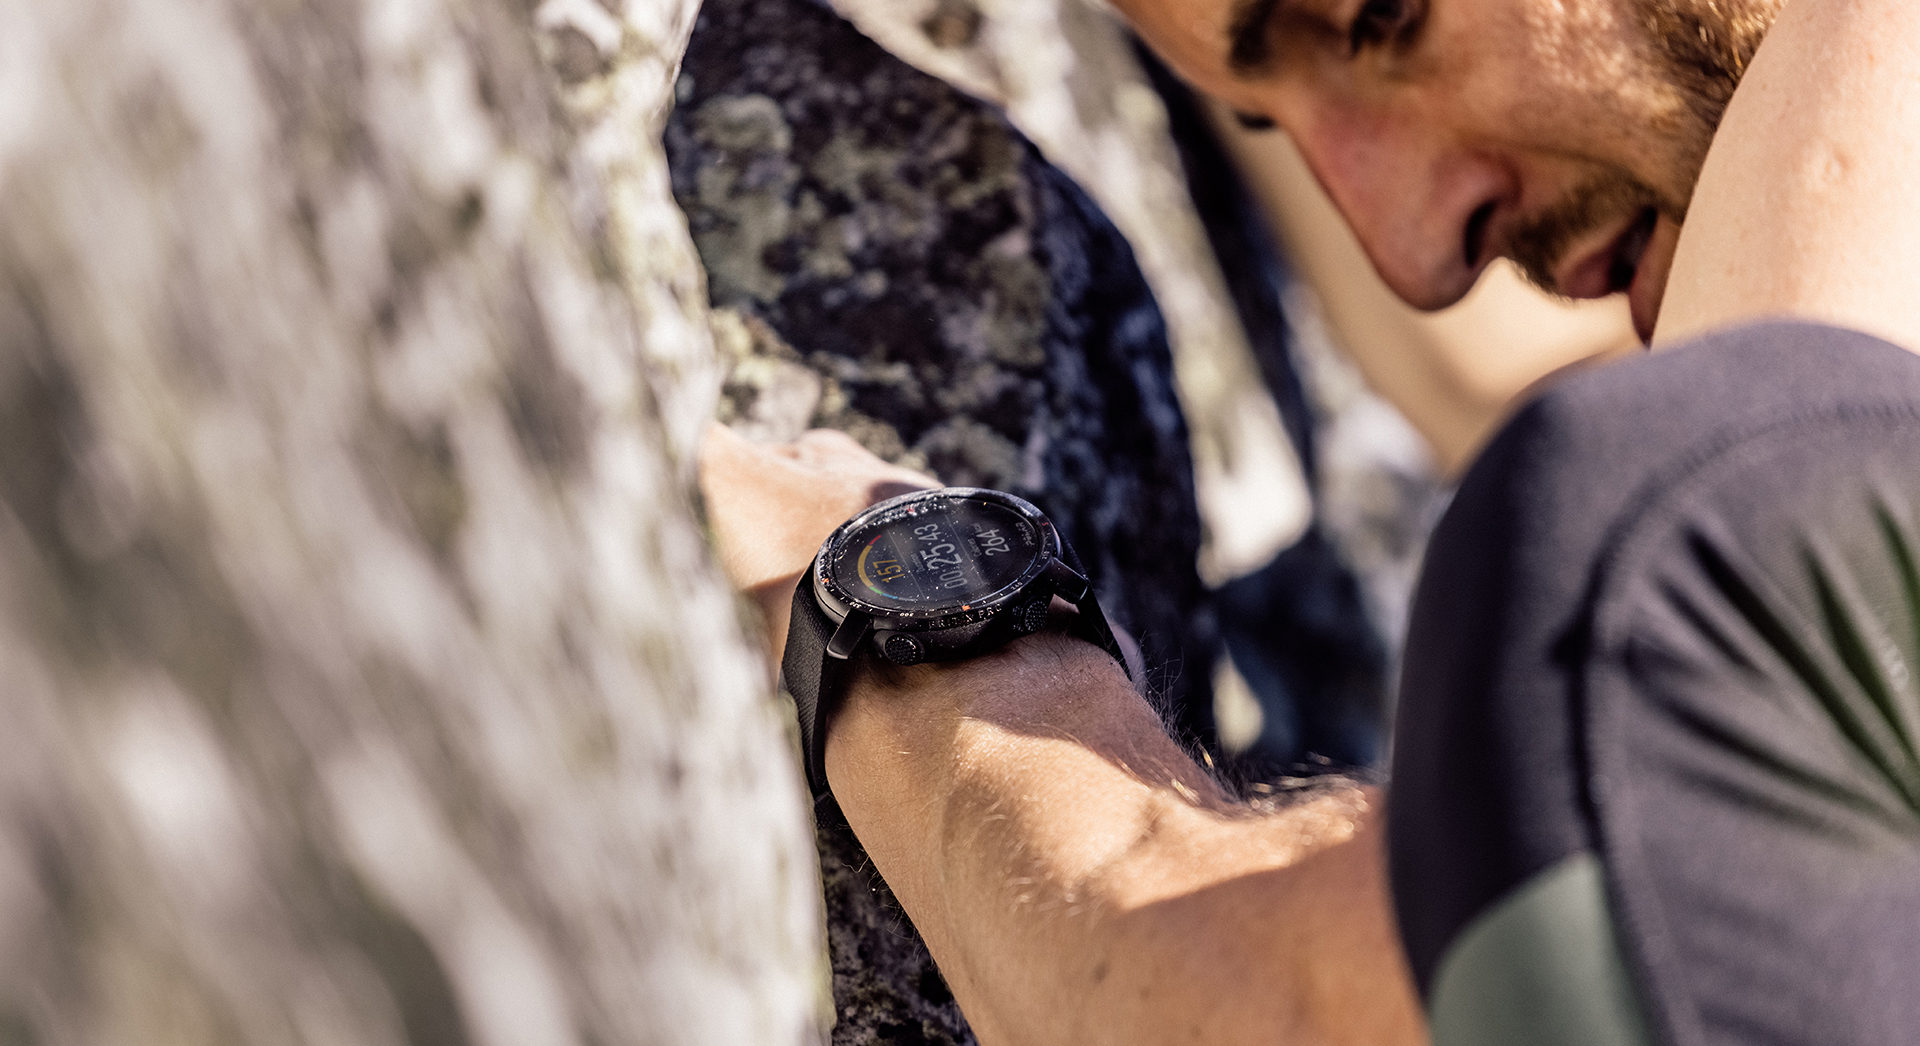 Polar Grit X Pro sports watch: Price, specs and features